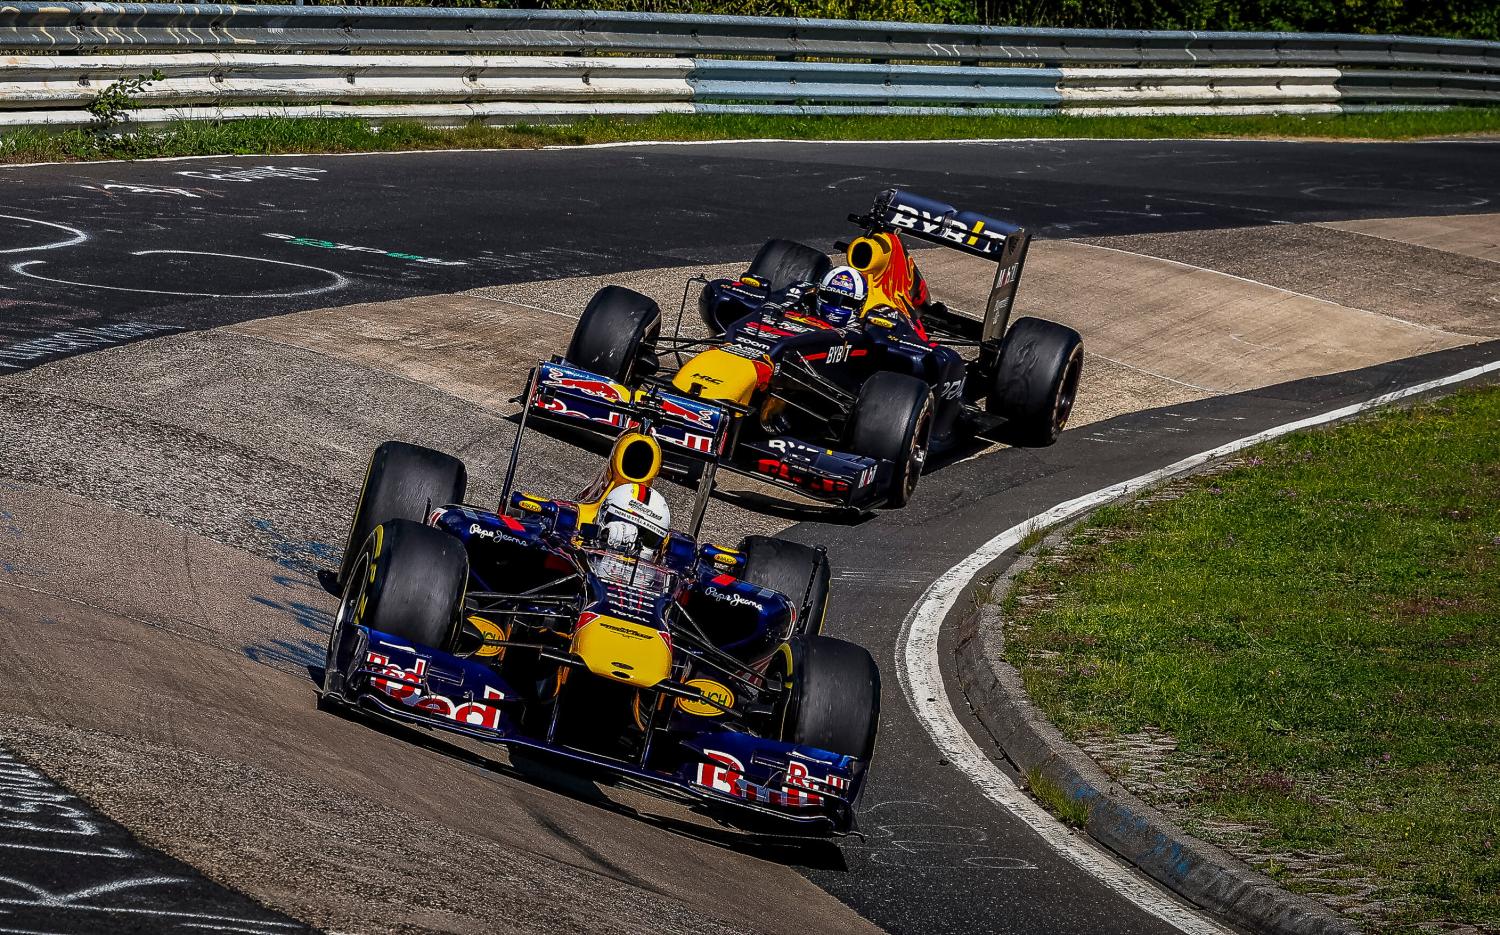 Watch Vettel Belt Around The 'Ring In A V8 F1 Car On E-Fuels